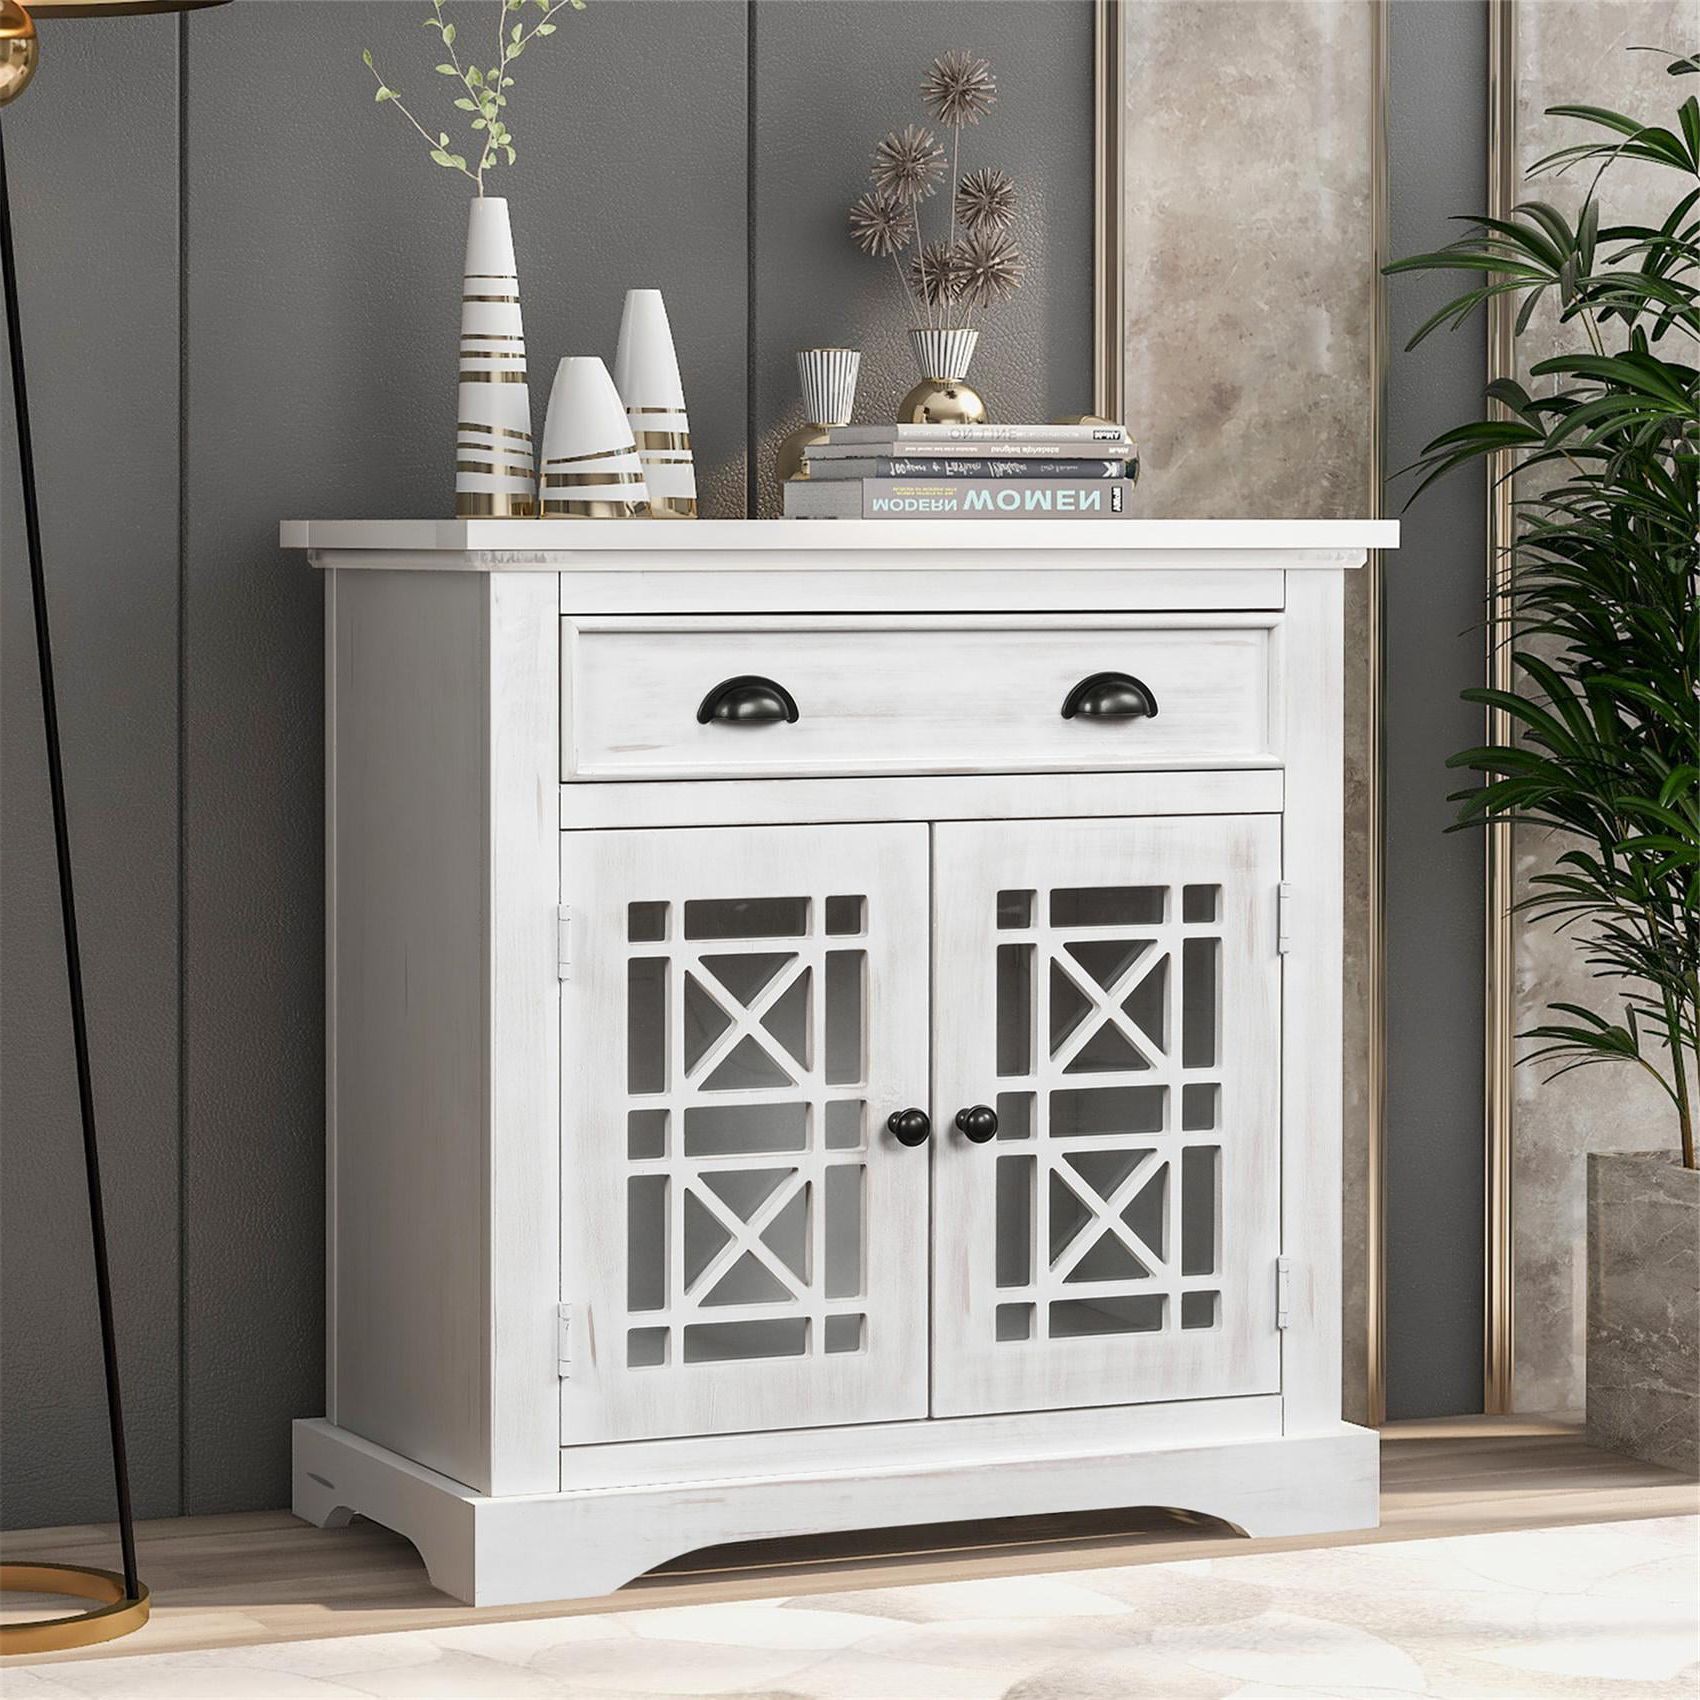 White Rectangular Storage Cabinet, Console Sofa Table Wih Cabinet And Throughout Preferred Freestanding Tables With Drawers (View 8 of 15)